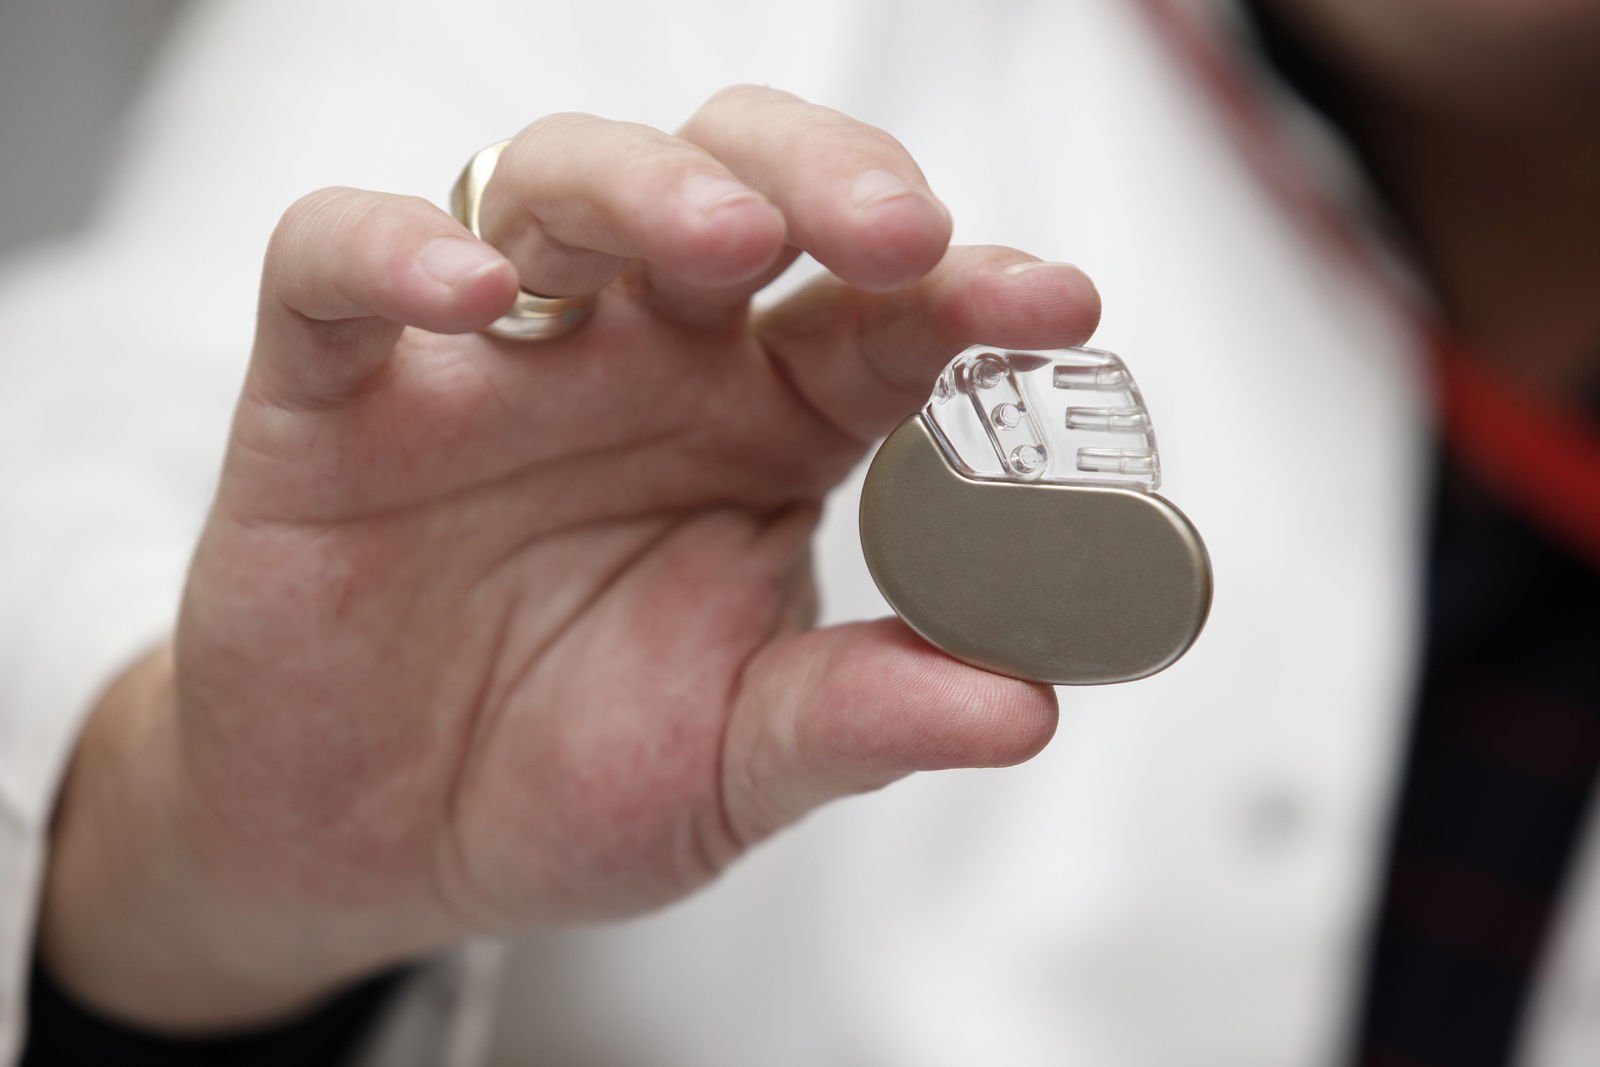 Does a pacemaker affect car insurance?